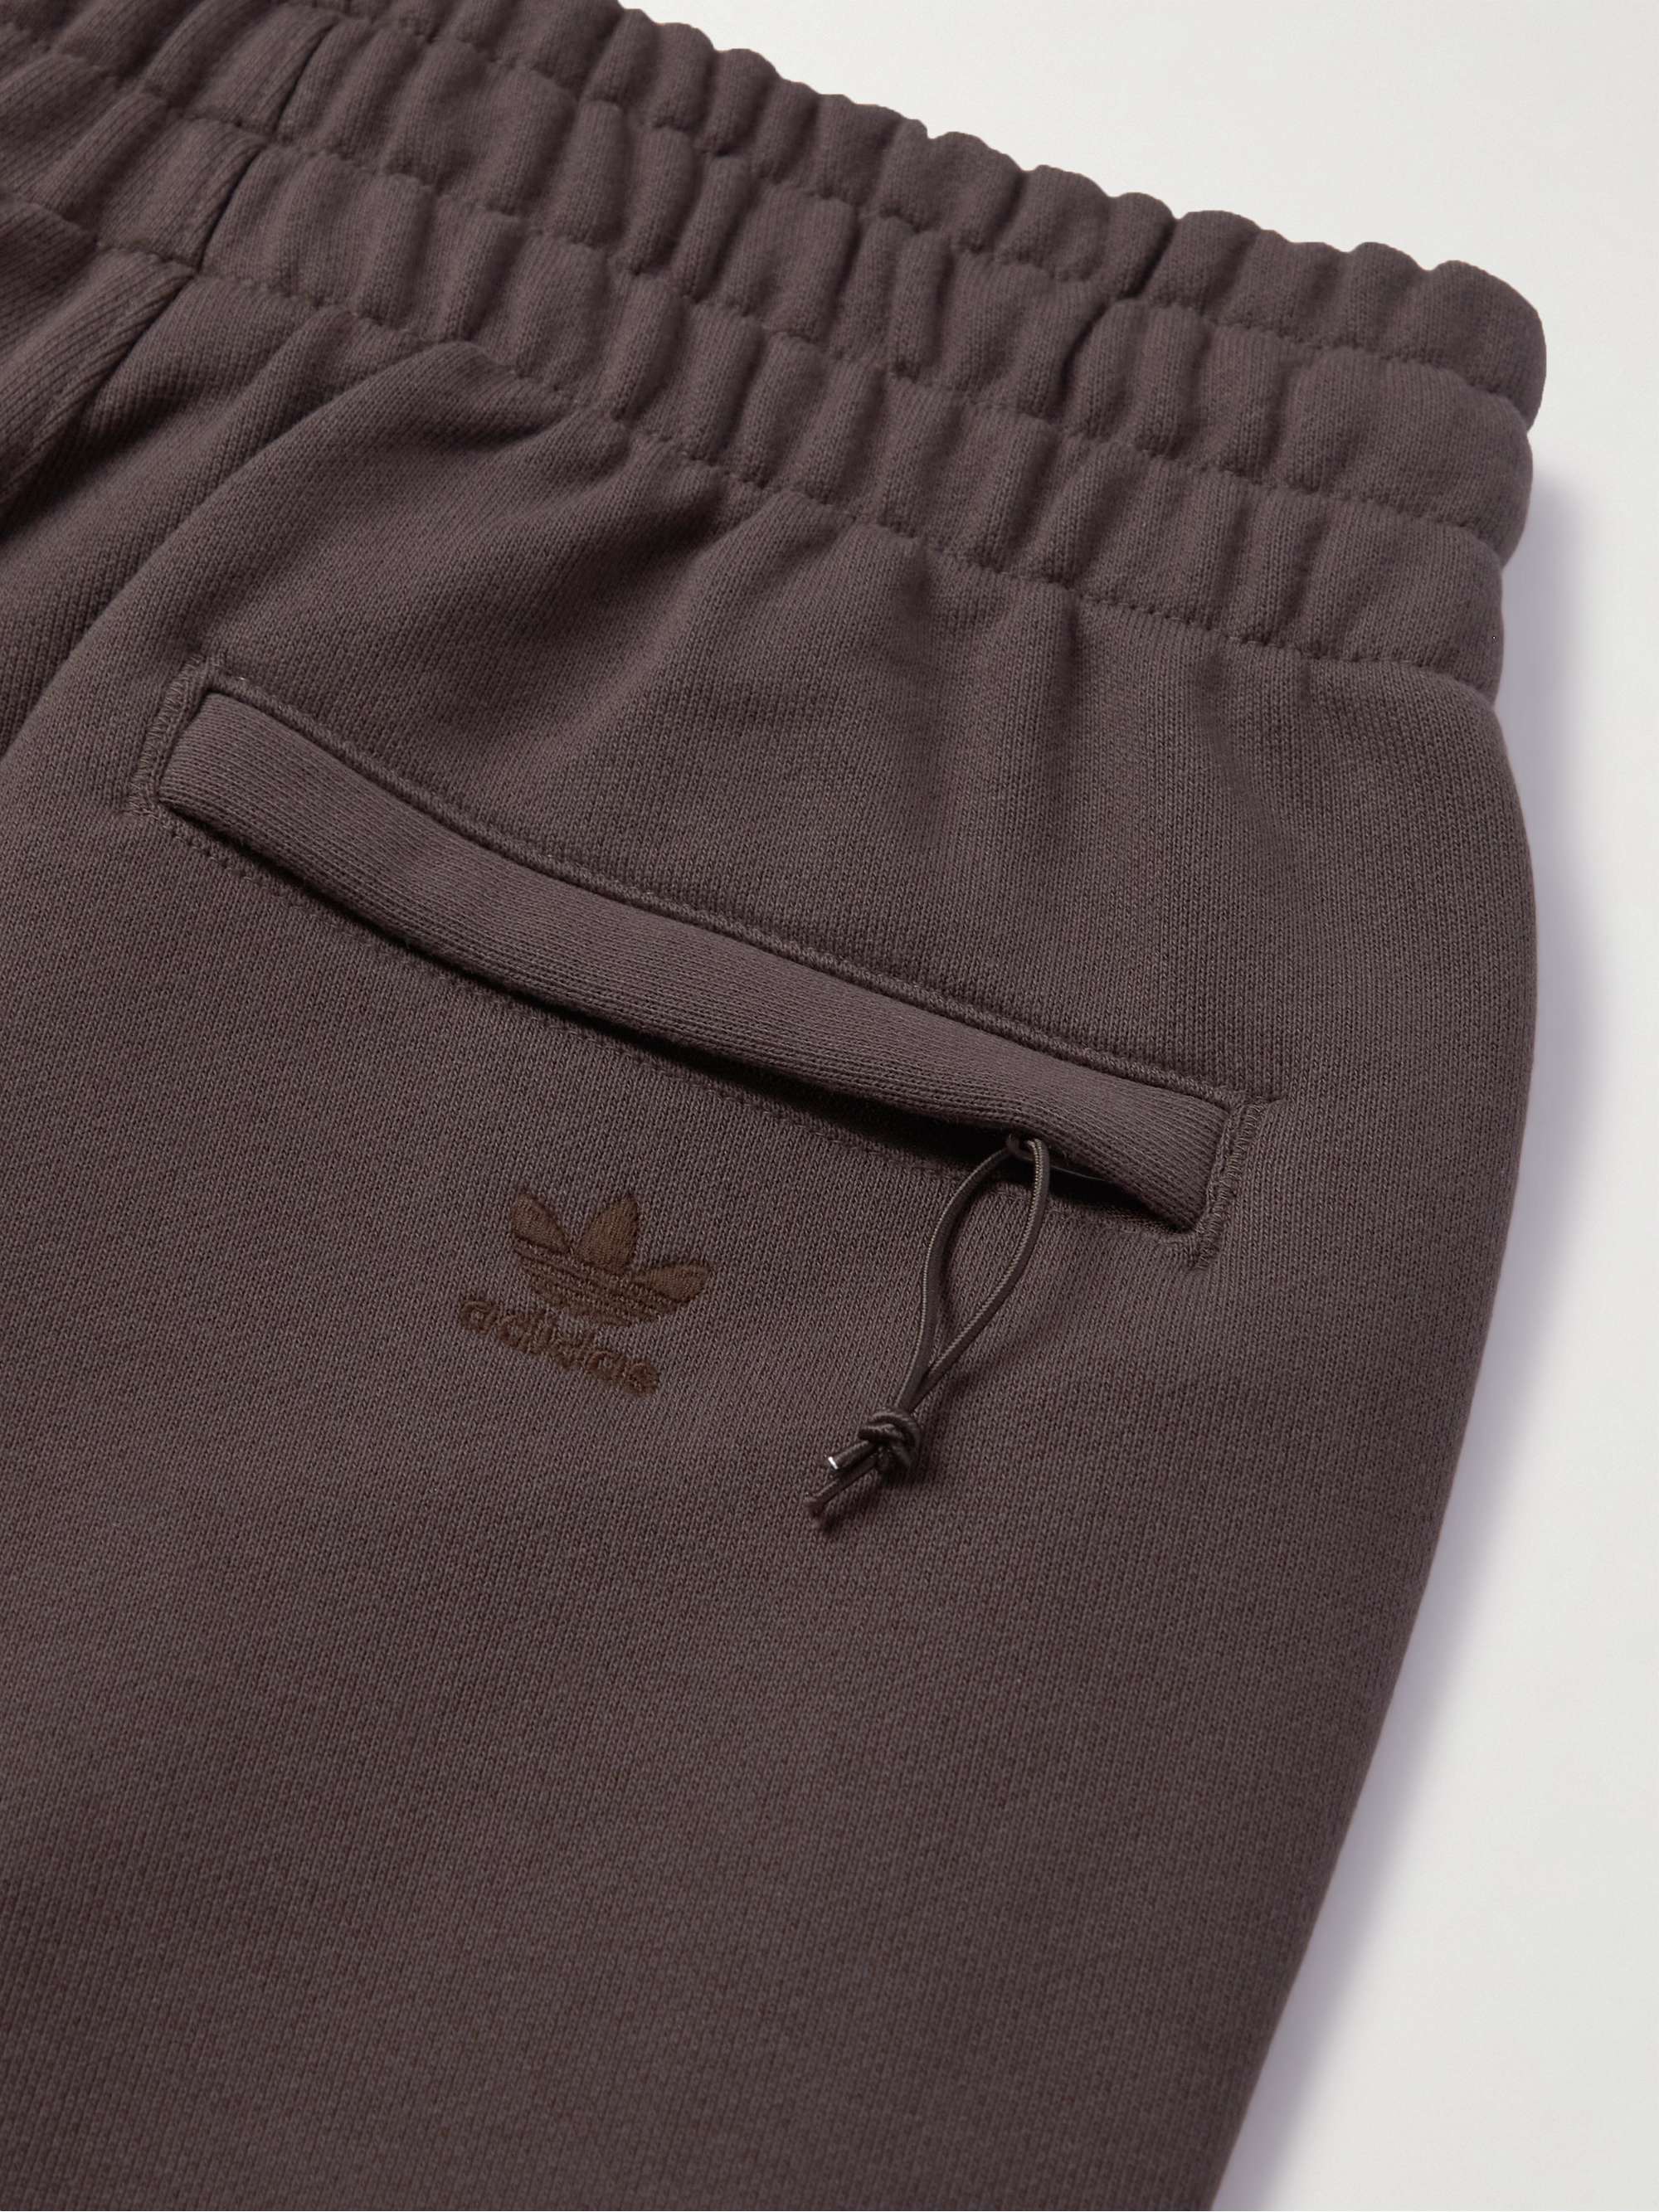 ADIDAS ORIGINALS + Pharrell Williams Tapered Embroidered Cotton-Jersey Sweatpants